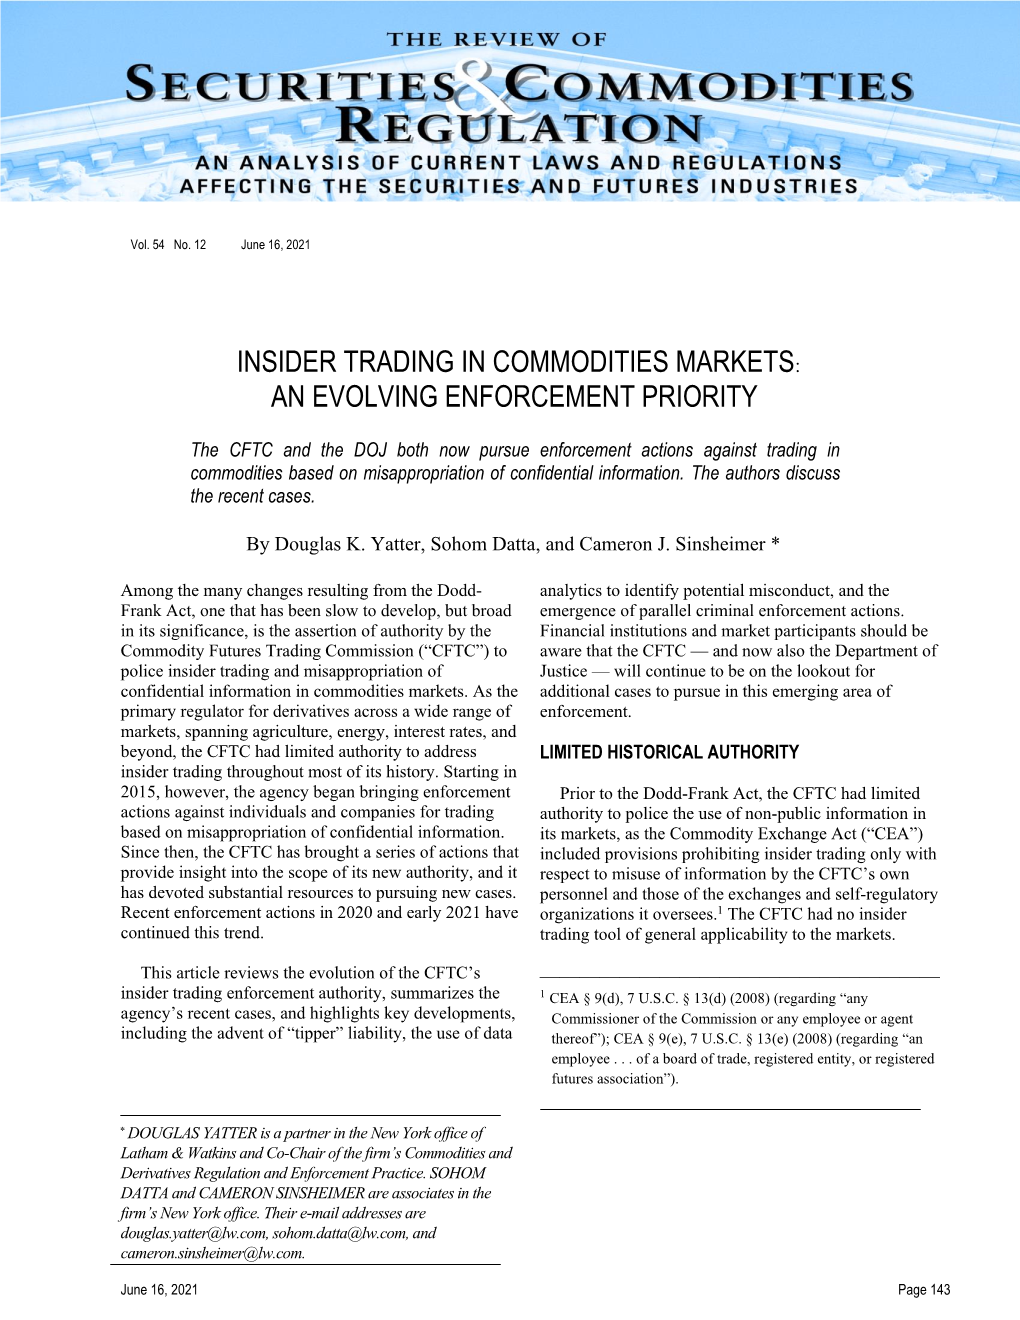 Insider Trading in Common Markets: an Evolving Enforcement Priority